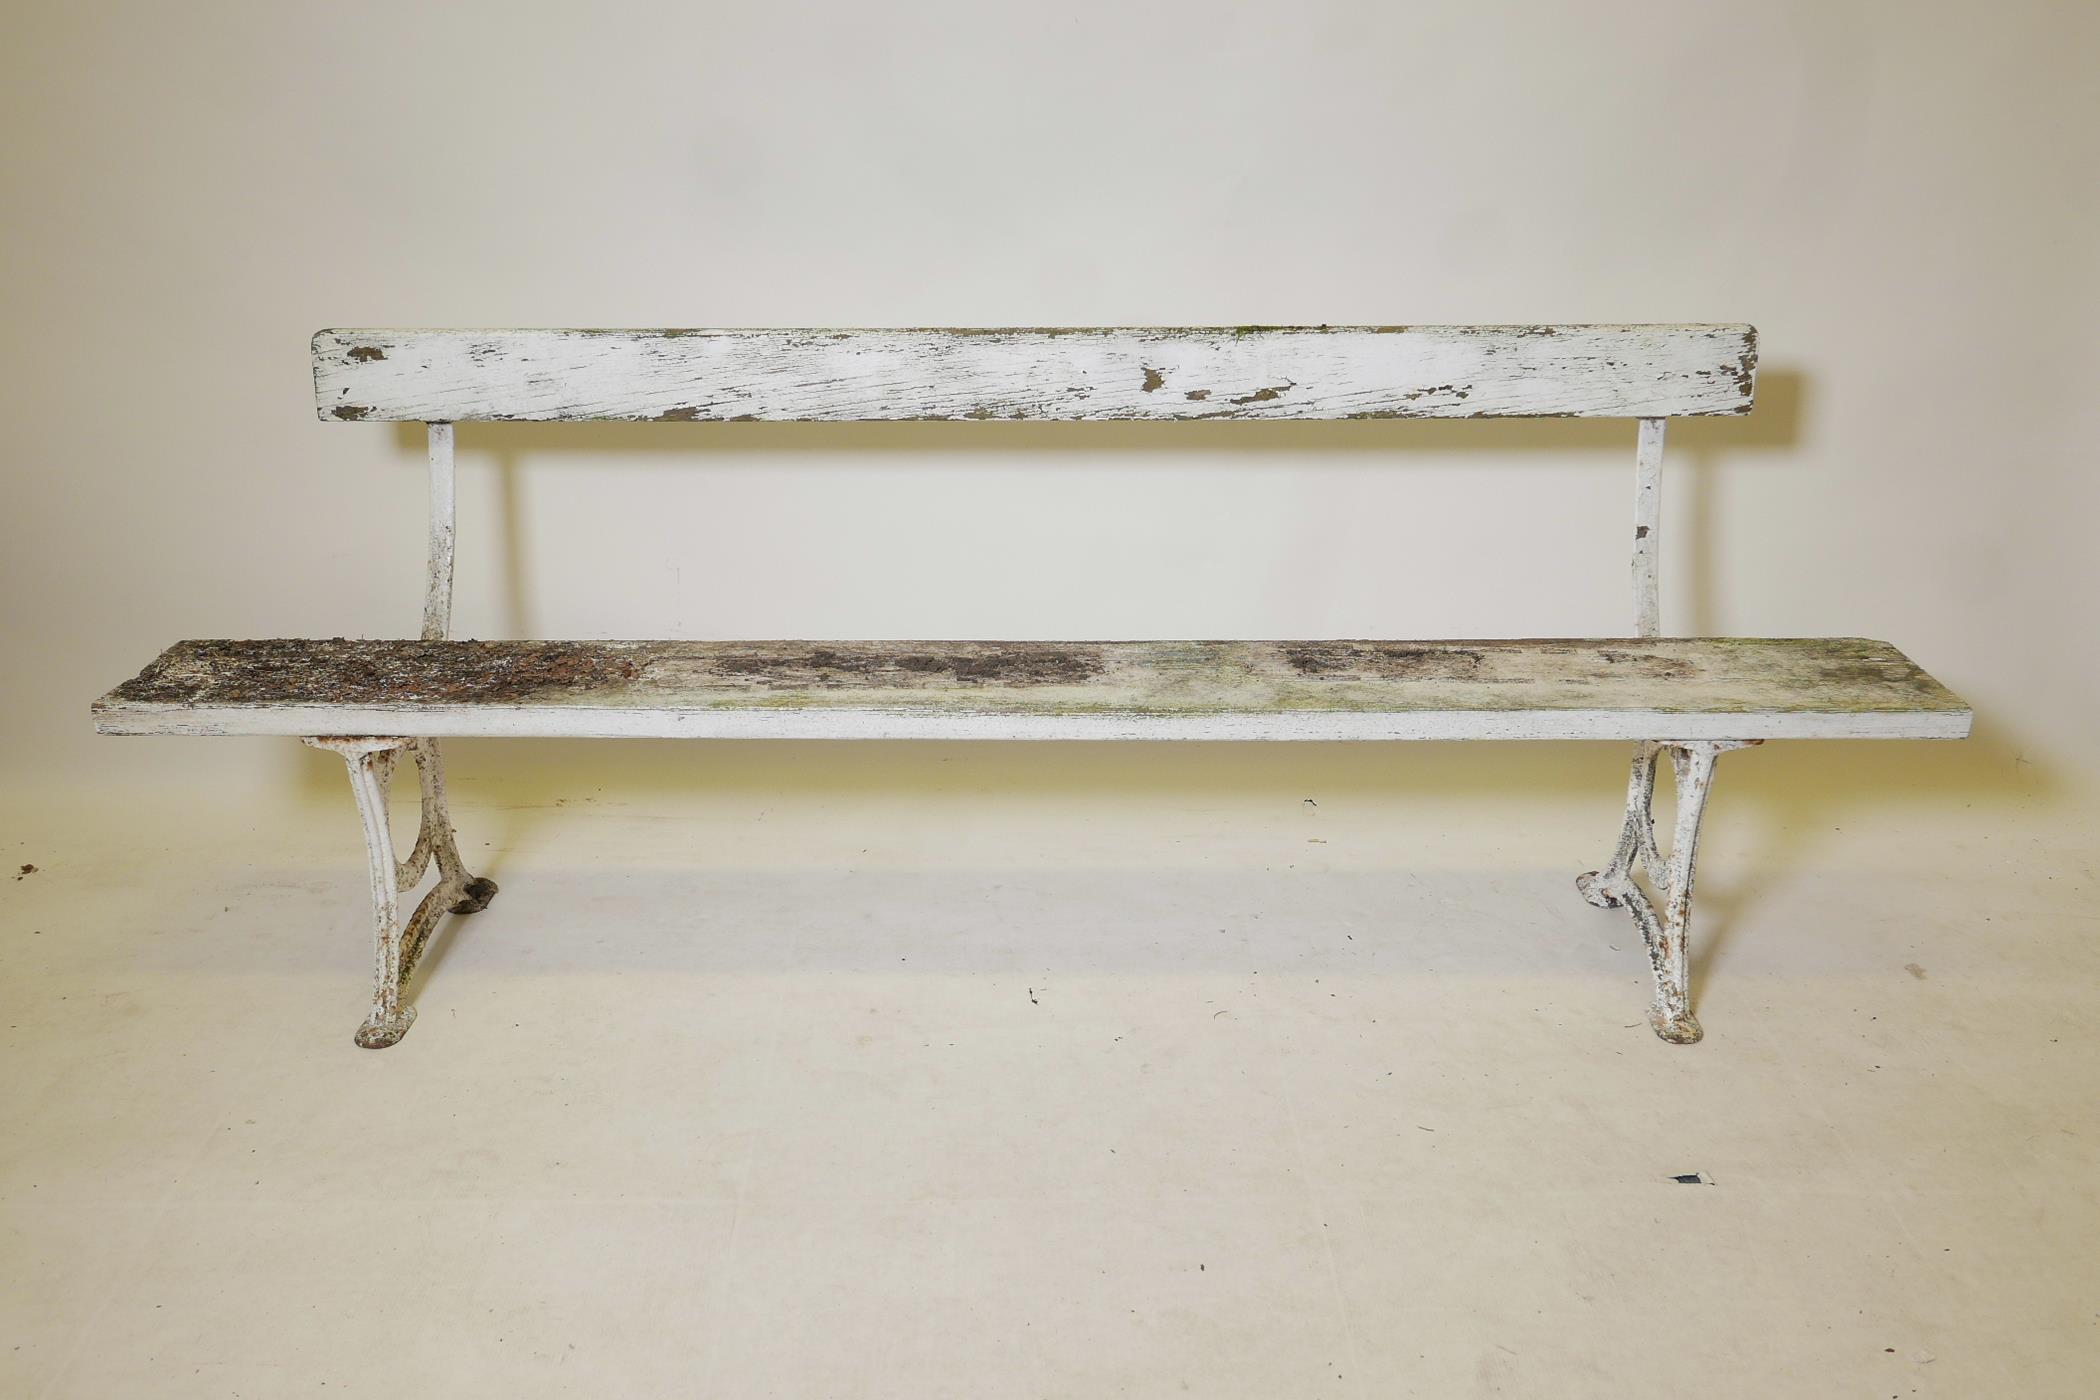 A vintage painted metal and wood low bench, 79" long